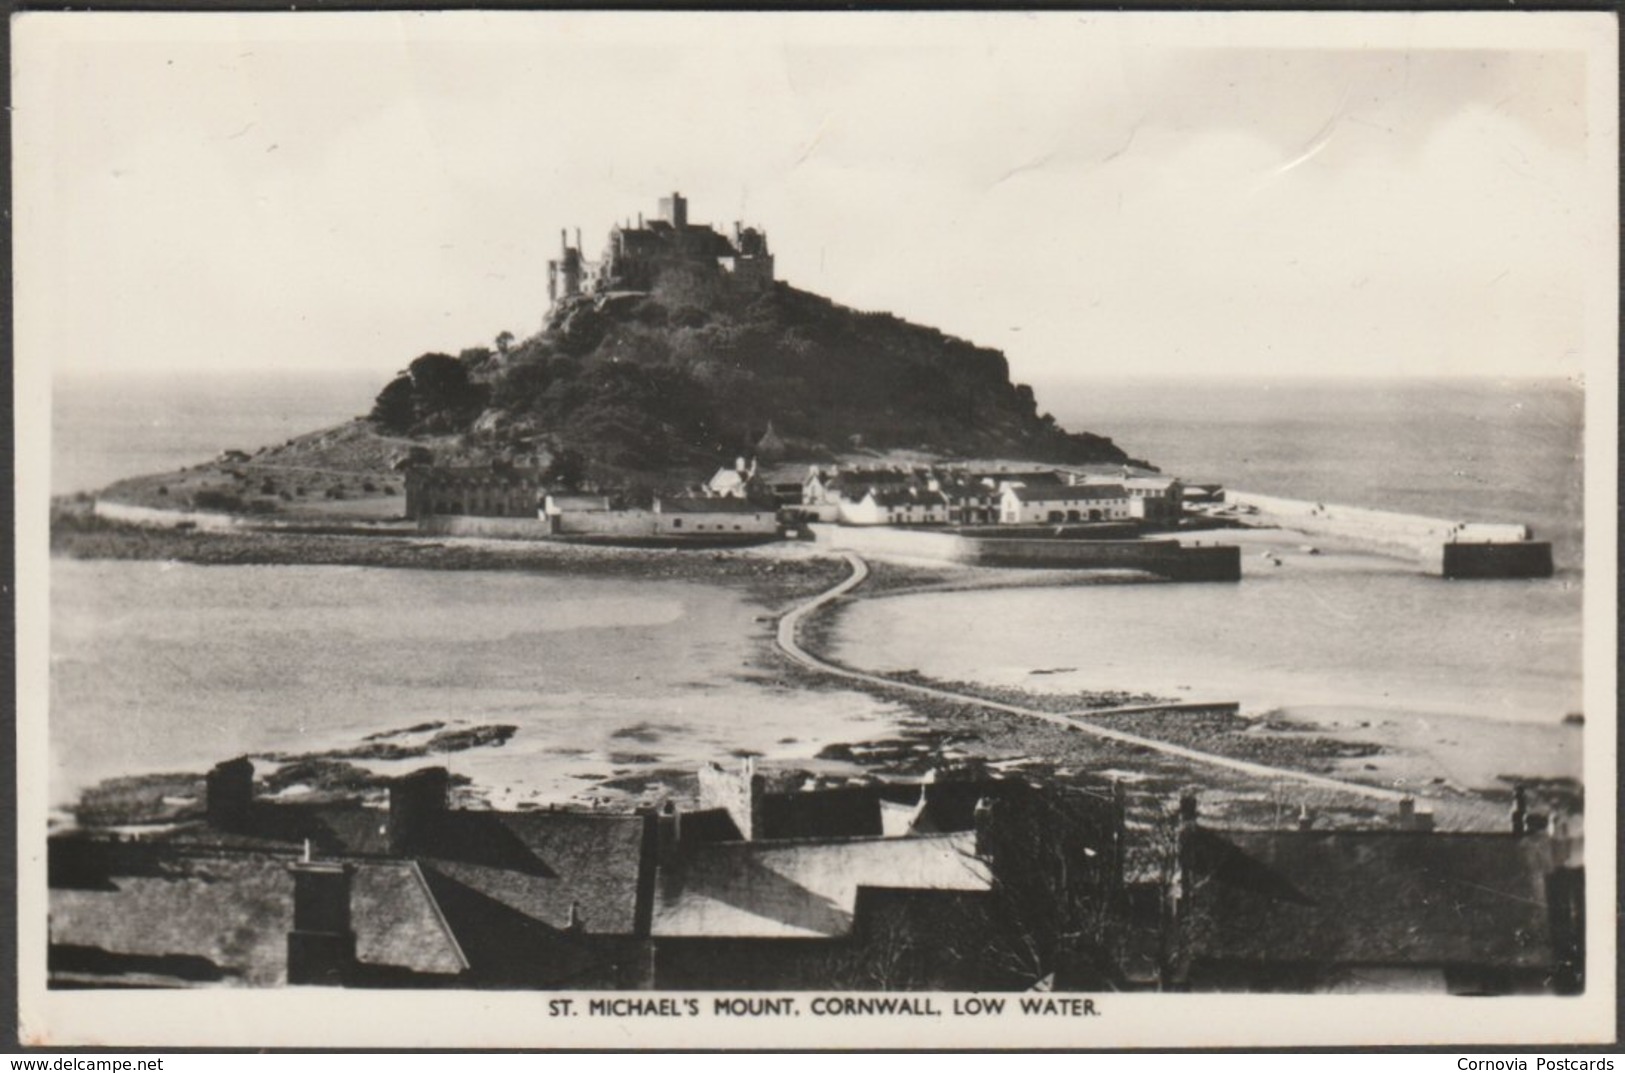 Low Water, St Michael's Mount, Cornwall, C.1950s - Photochrom RP Postcard - St Michael's Mount